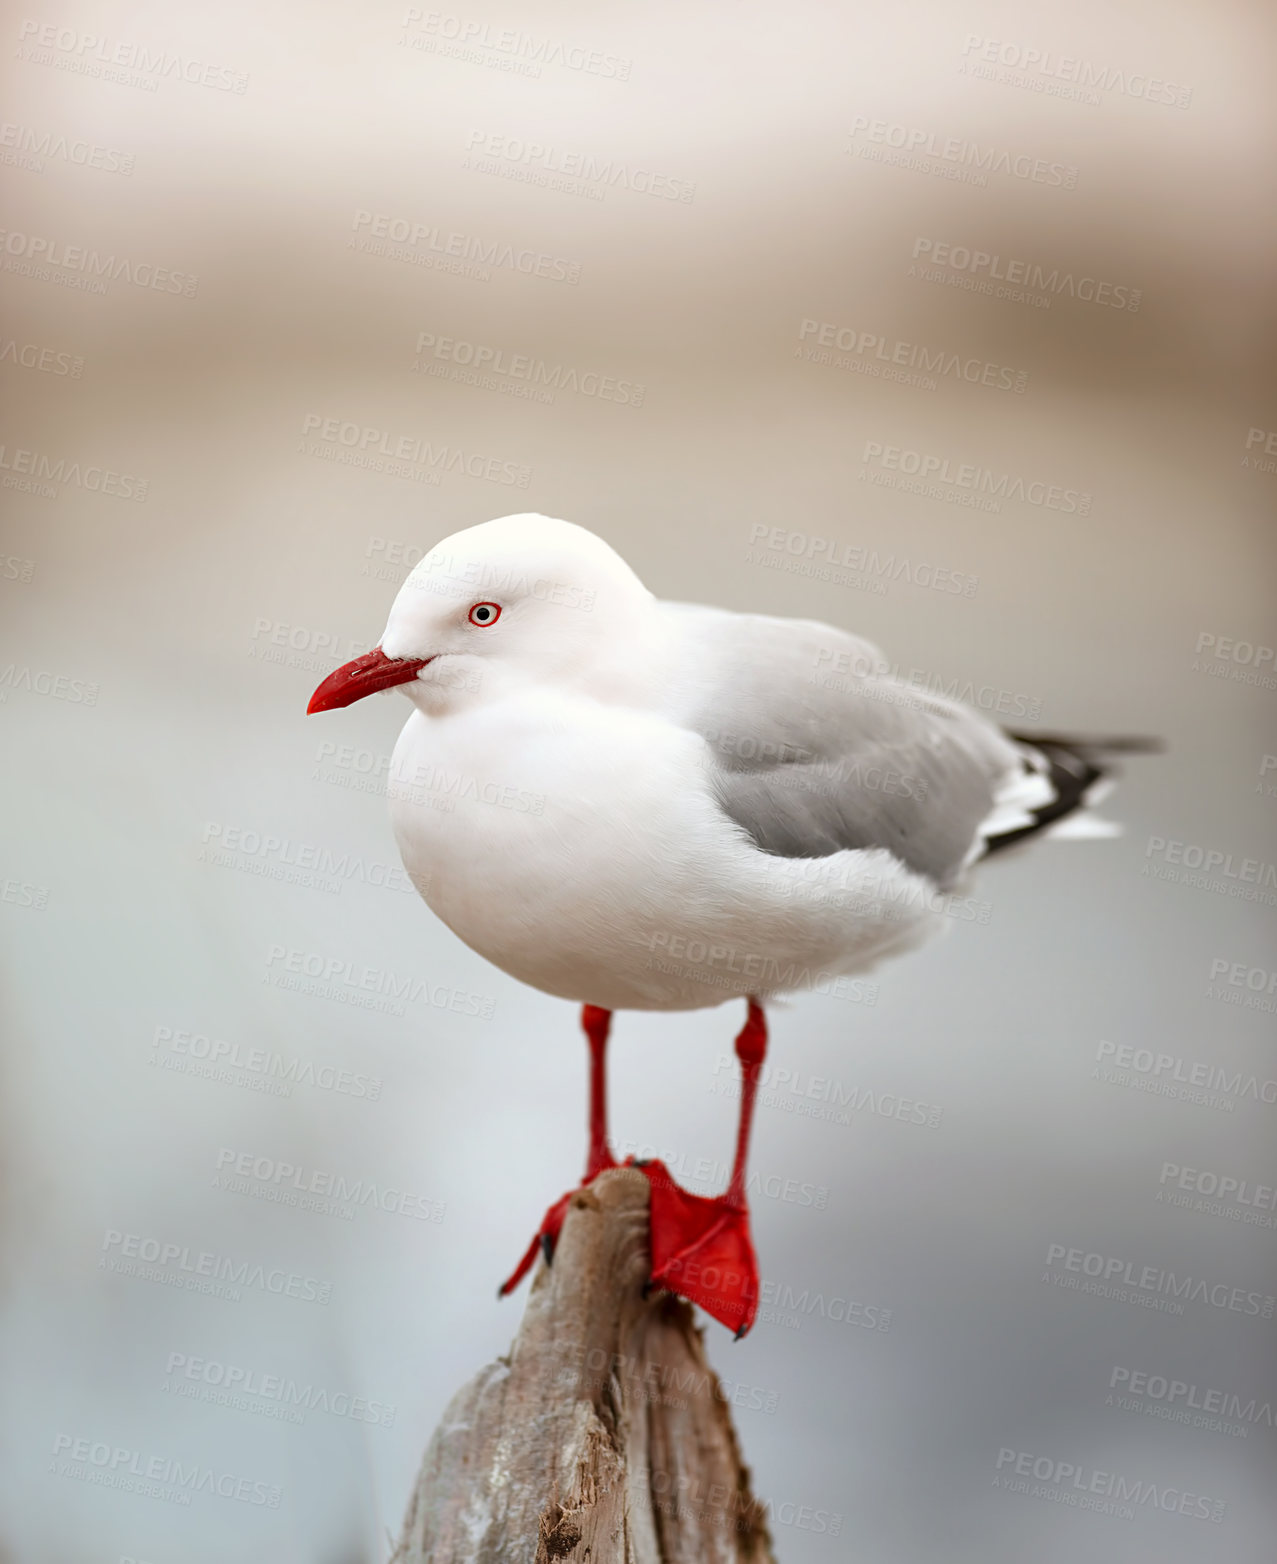 Buy stock photo Portrait of a red billed gull standing on wood against a blur background with copy space. Closeup of a beautiful white seagull bird balancing on a stump outdoors with copyspace